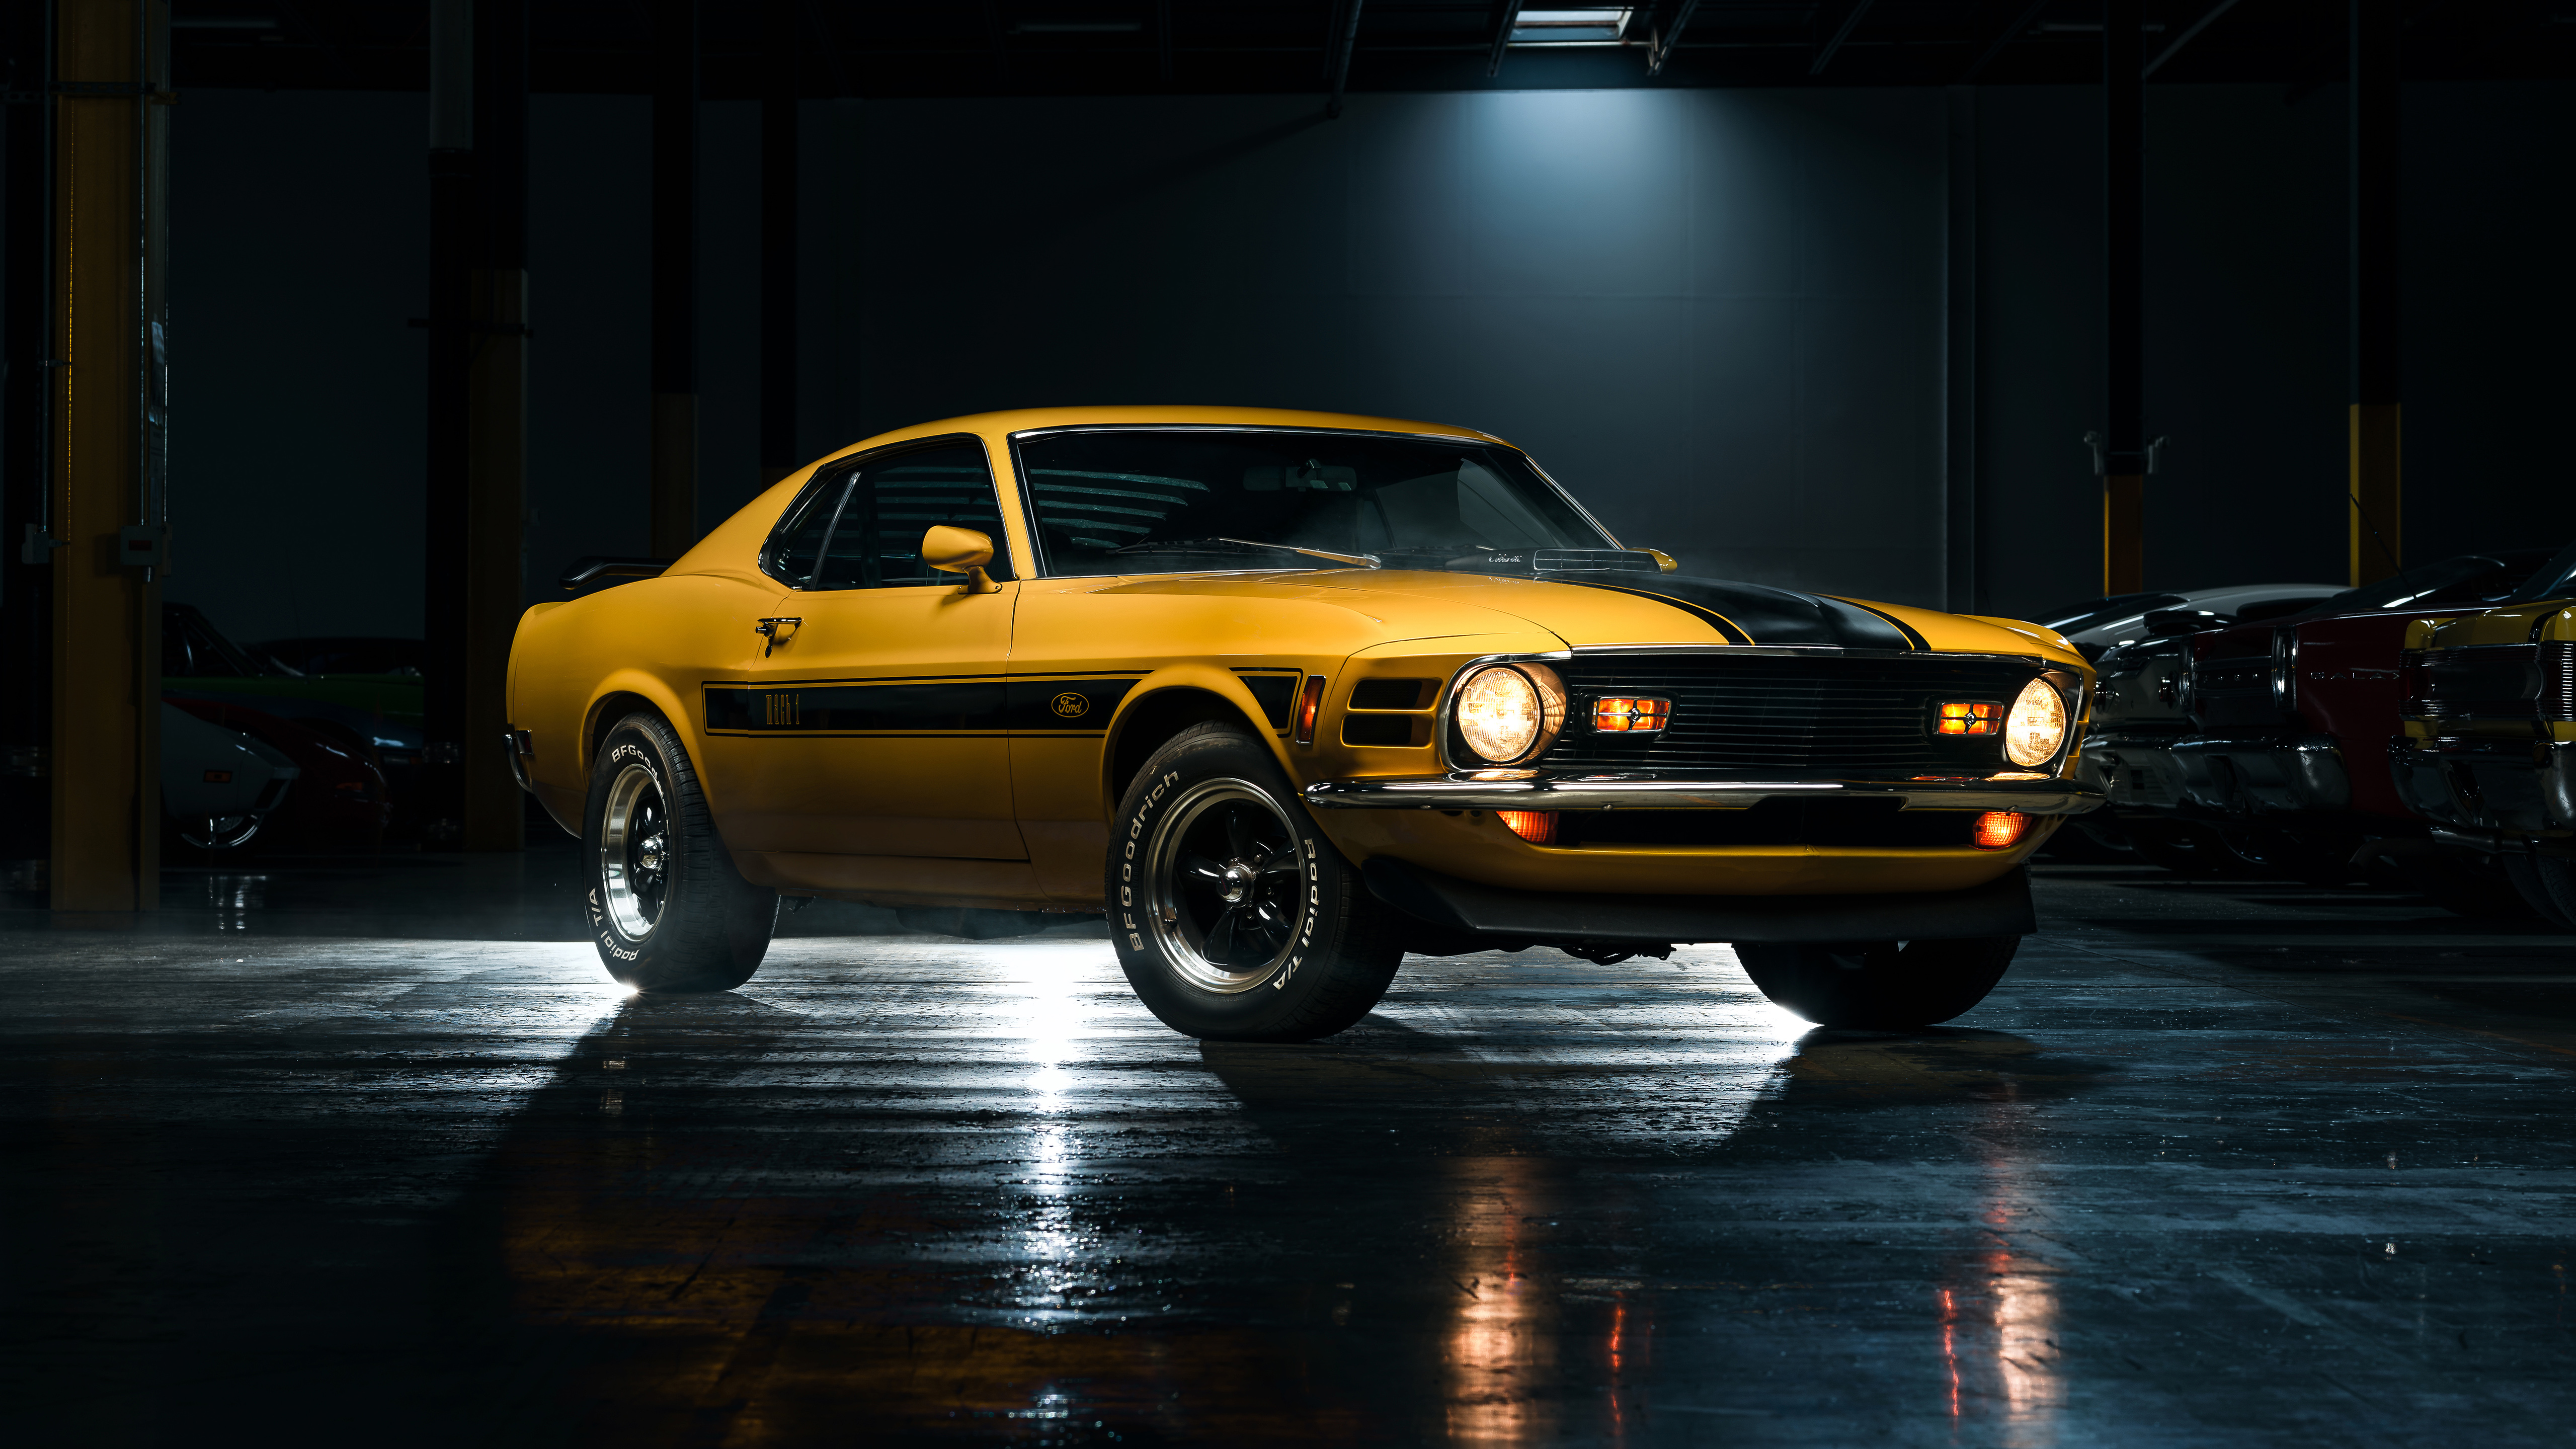 General 5120x2880 Ford Mustang Mach 1 Ford Mustang Ford car muscle cars yellow cars low light parking lot